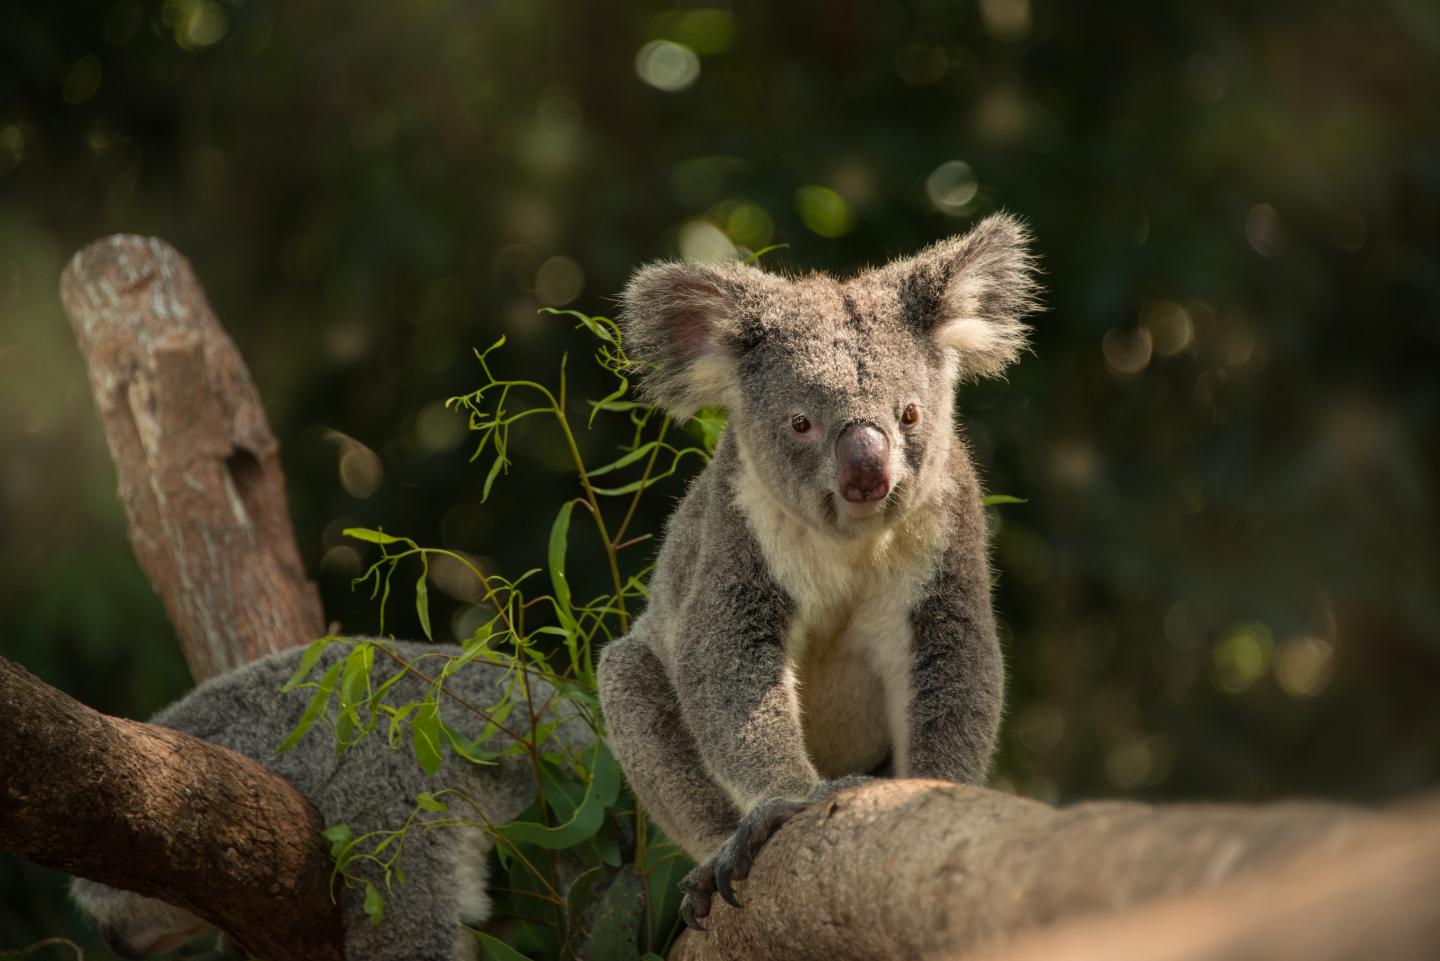 Koalas and apes have evolved similar ways of walking in trees